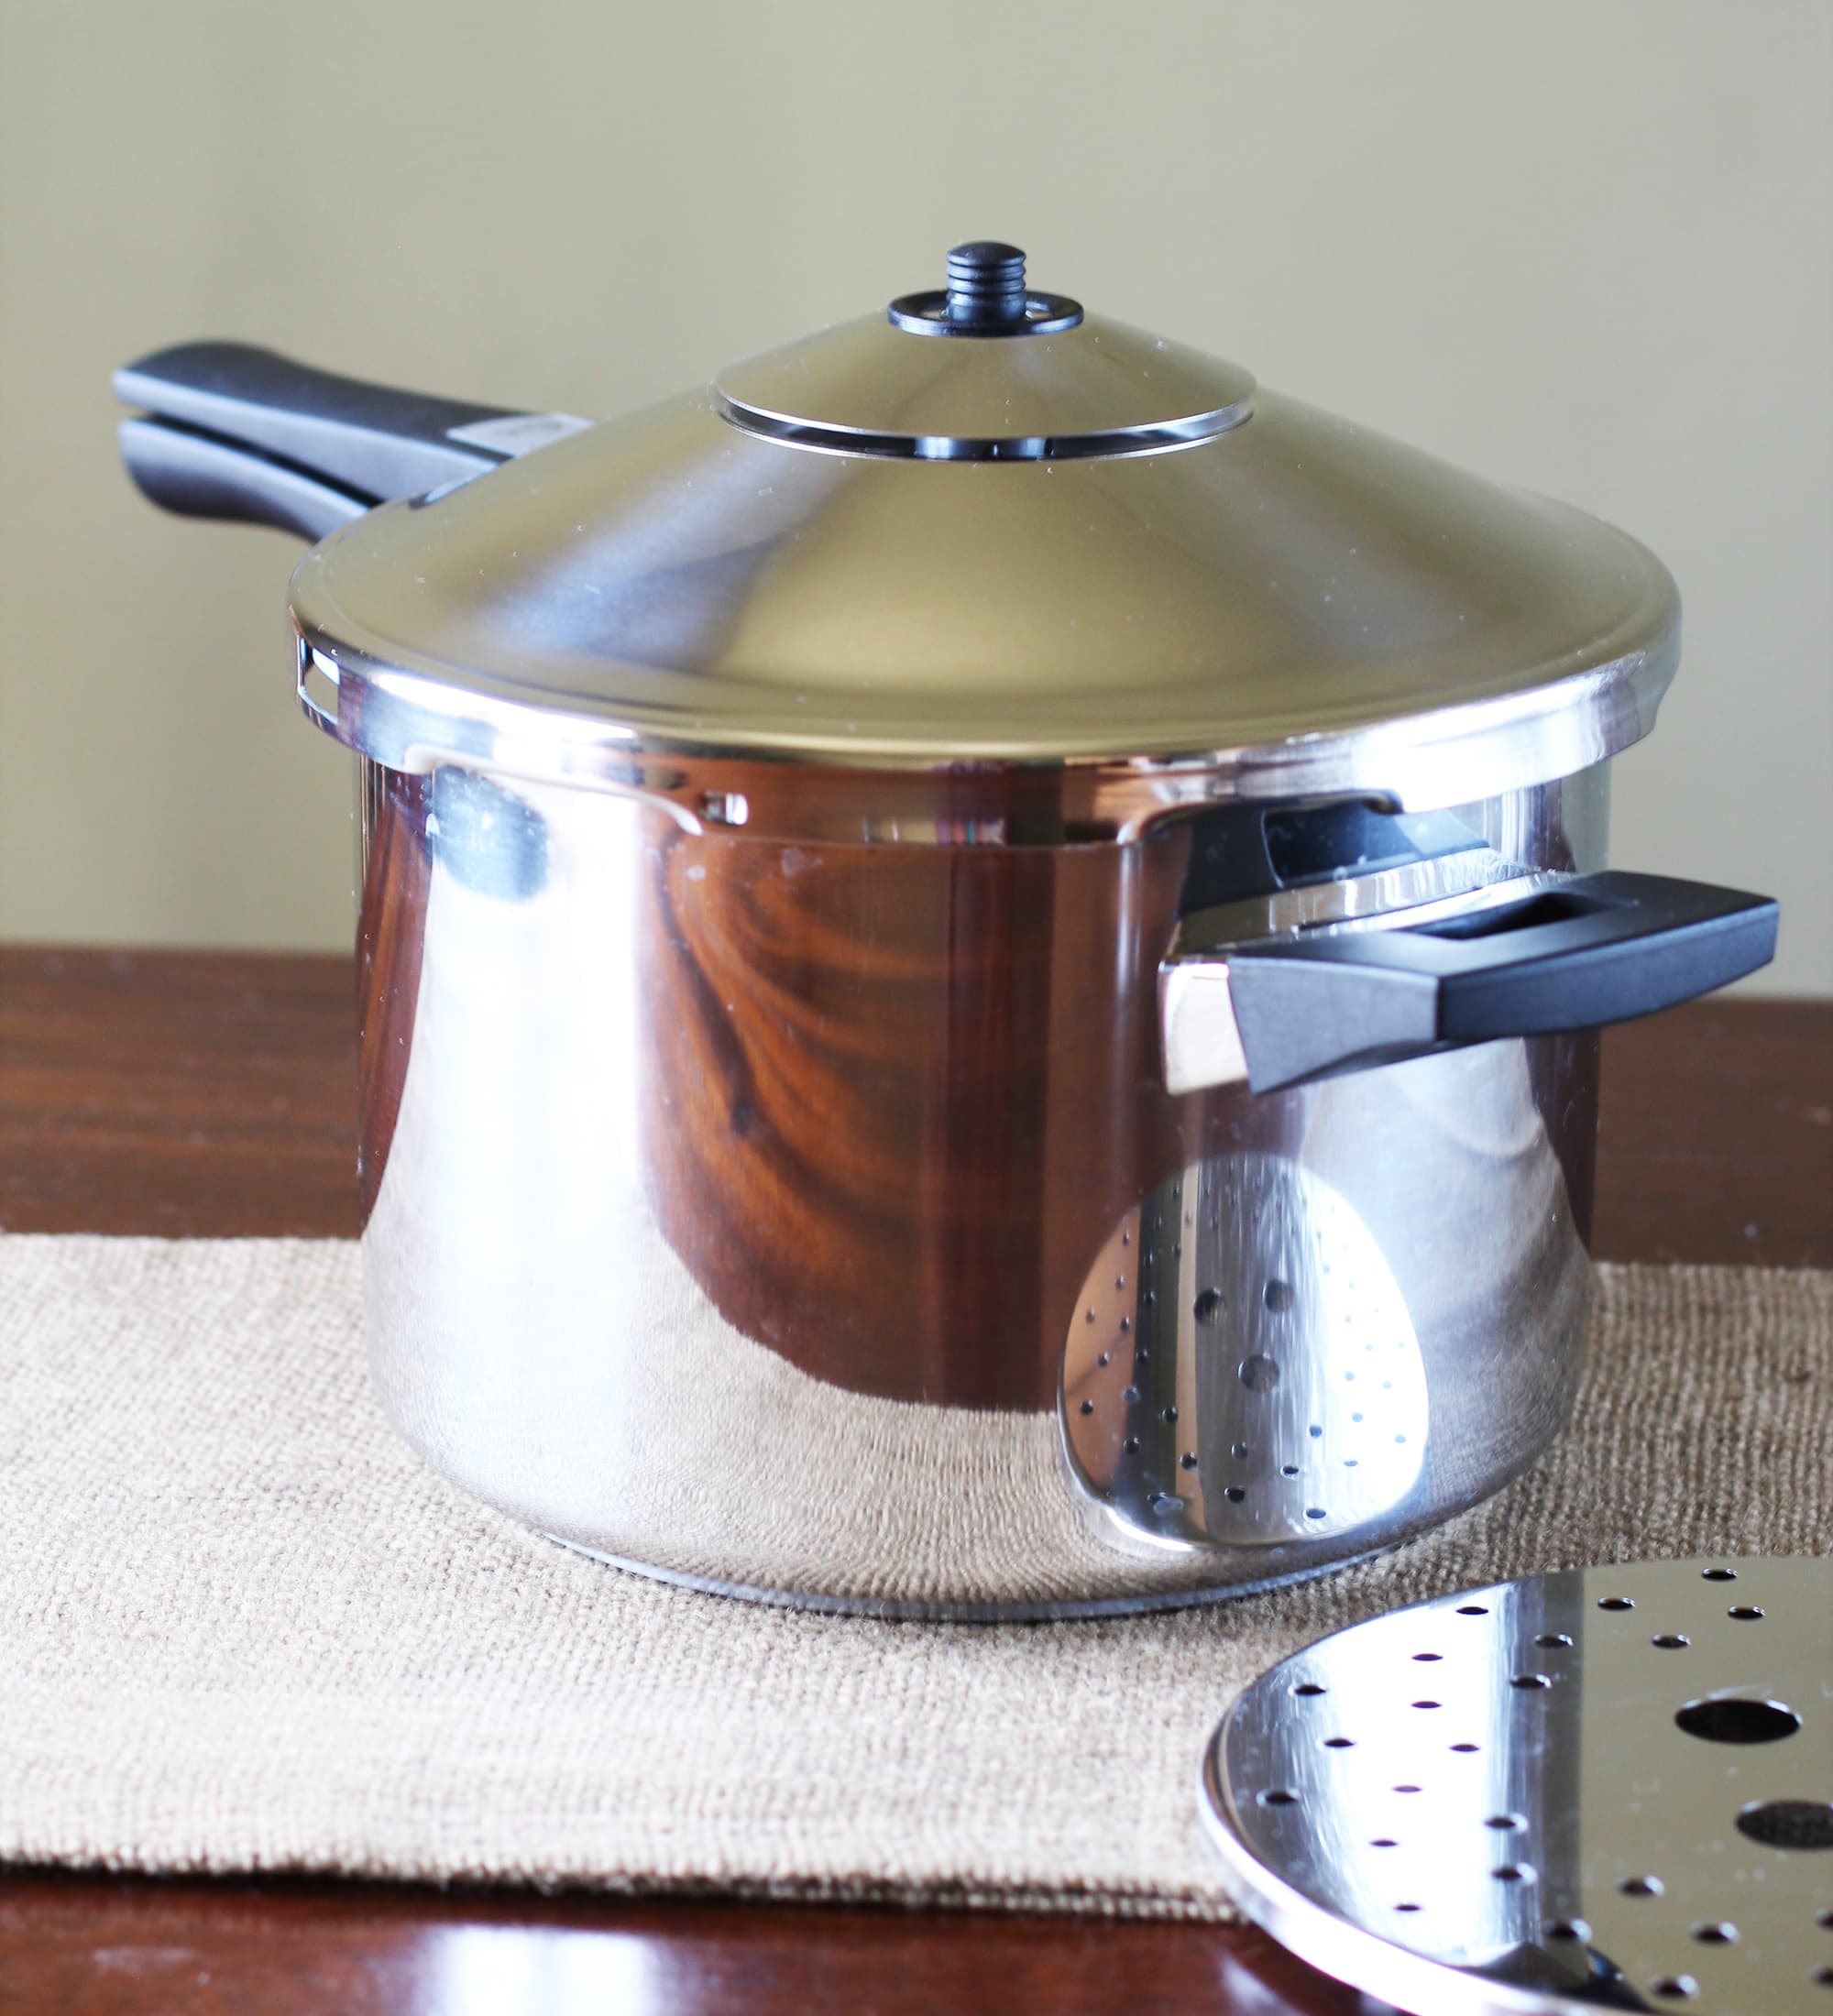 Kuhn Rikon Pressure Cookers: Are They a Good Choice?